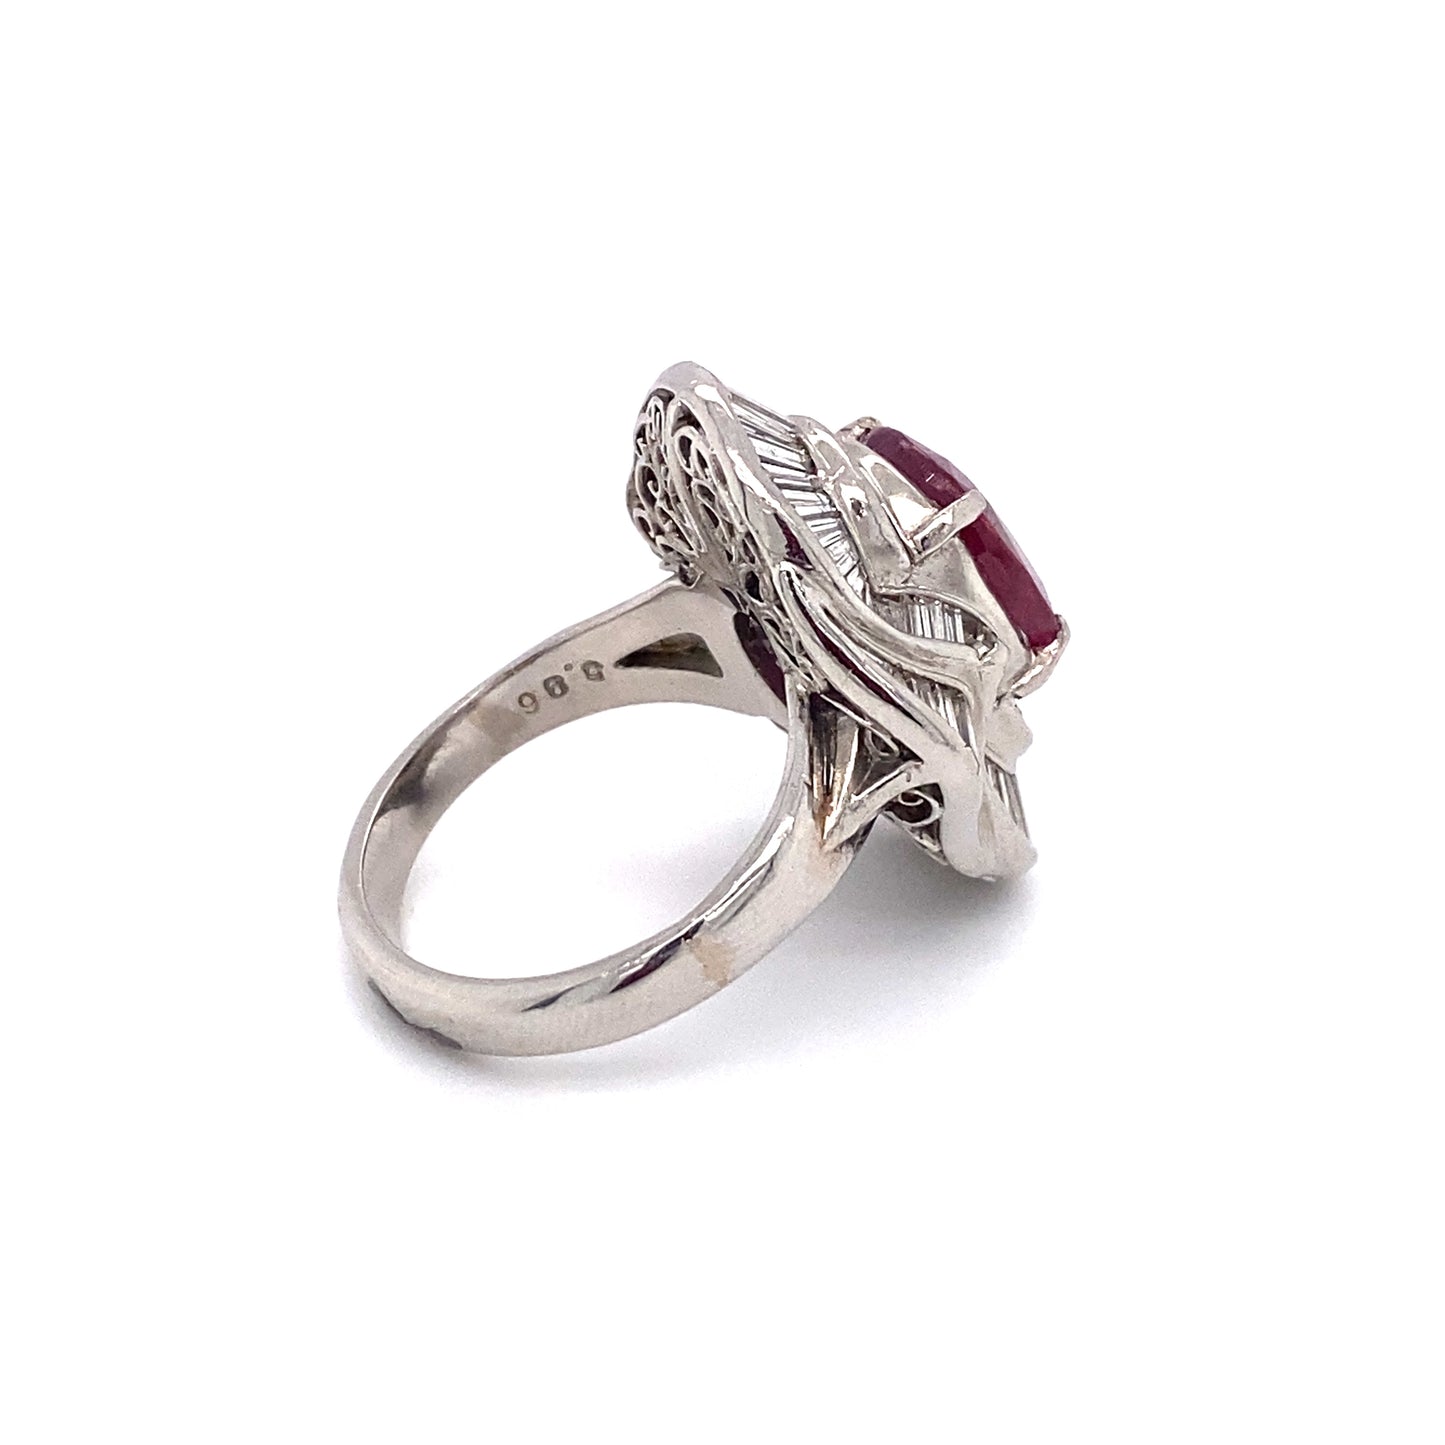 Circa 1980s 5.96 Carat Ruby and Diamond Cocktail Ring in Platinum